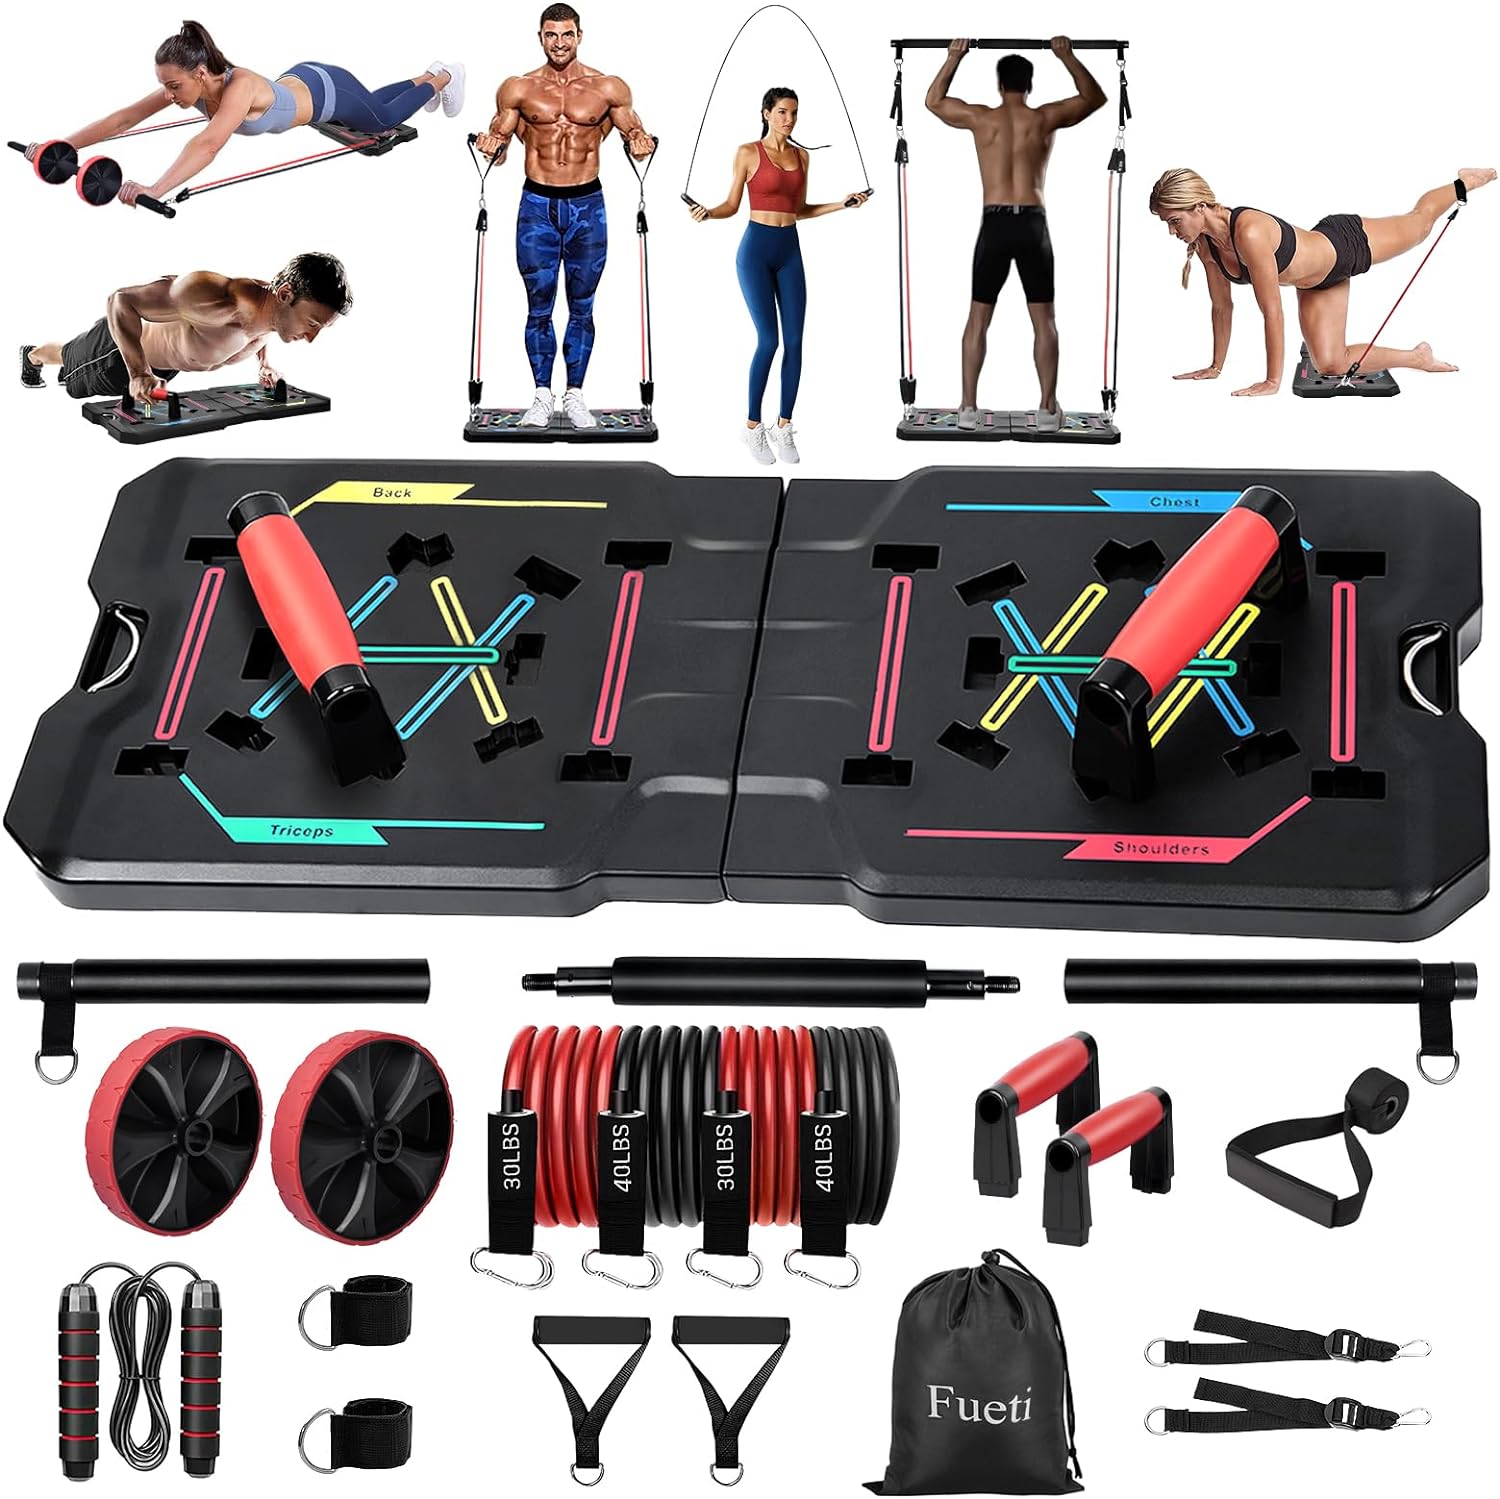 Home Gym Equipment, Large Compact Push Up Board, Portable Home Gym System with Pilates Bar, Resistance Band, Ab Roller Wheel, Full Body Workout at Home, Professional Push Up Strength Training